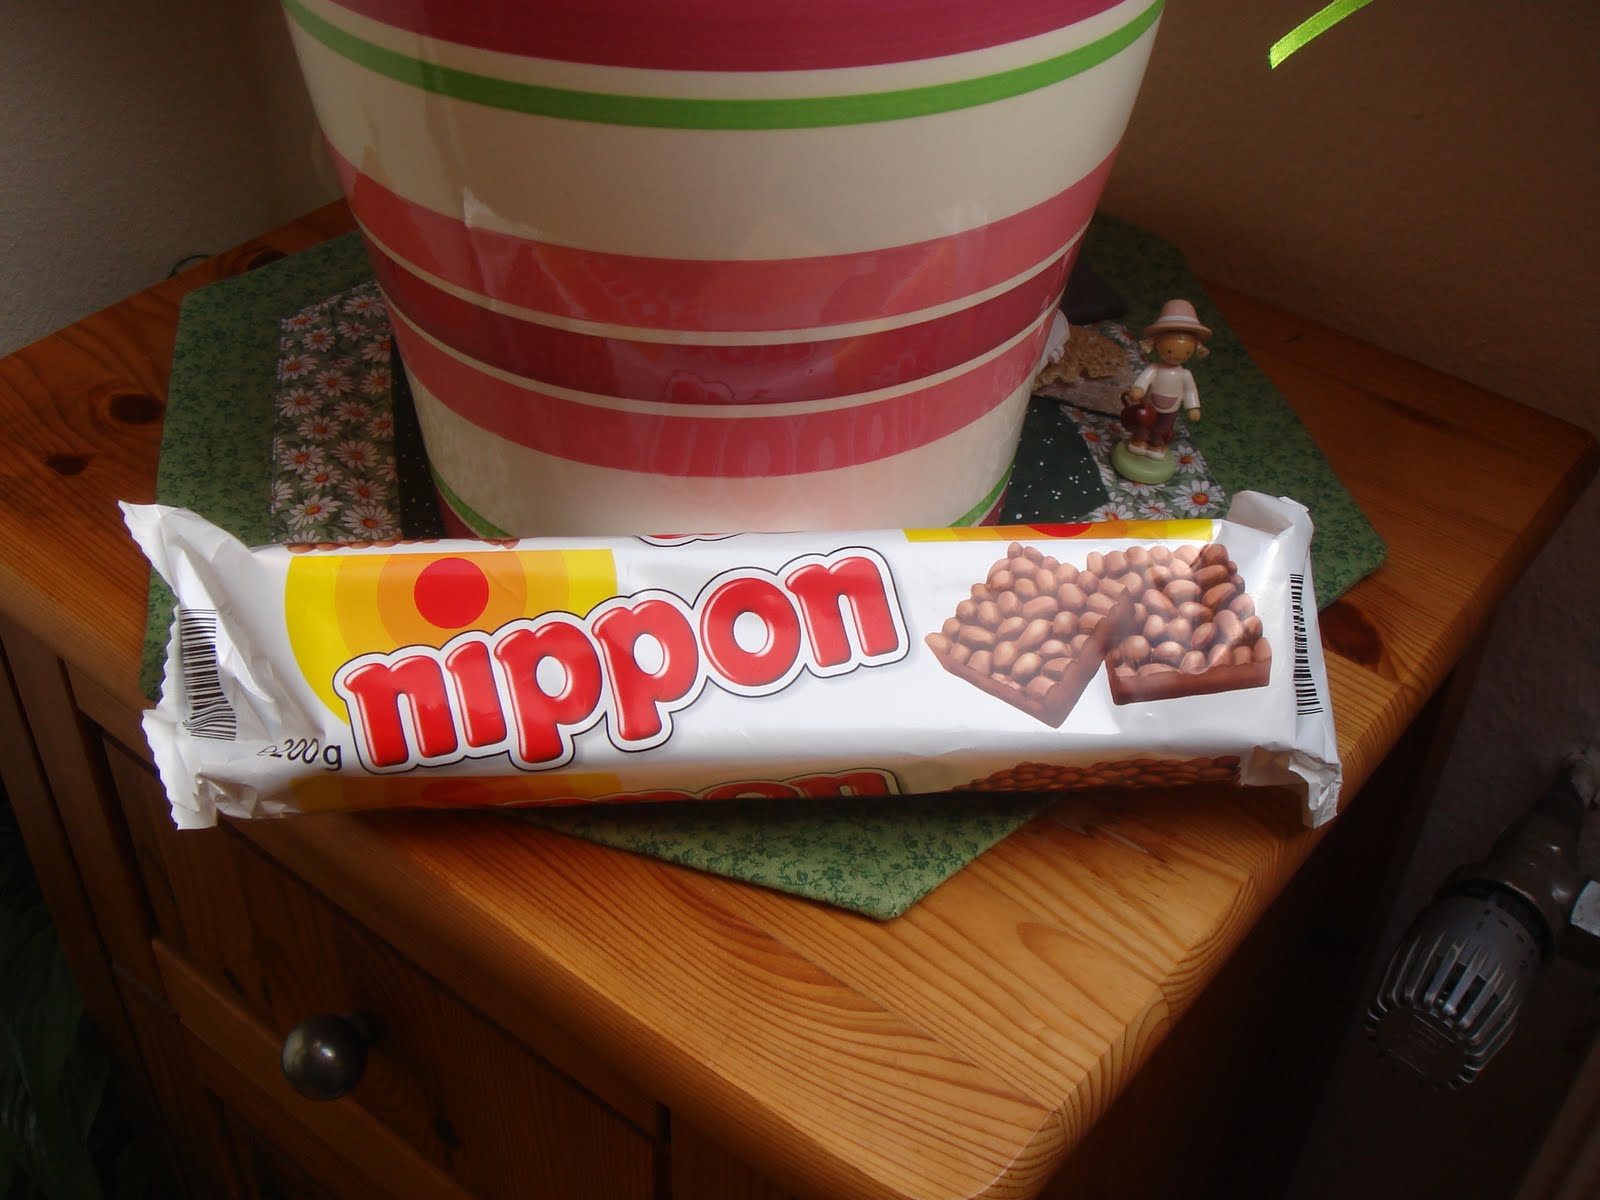 Nippon puffed rice and cereals with dark chocolate 200g